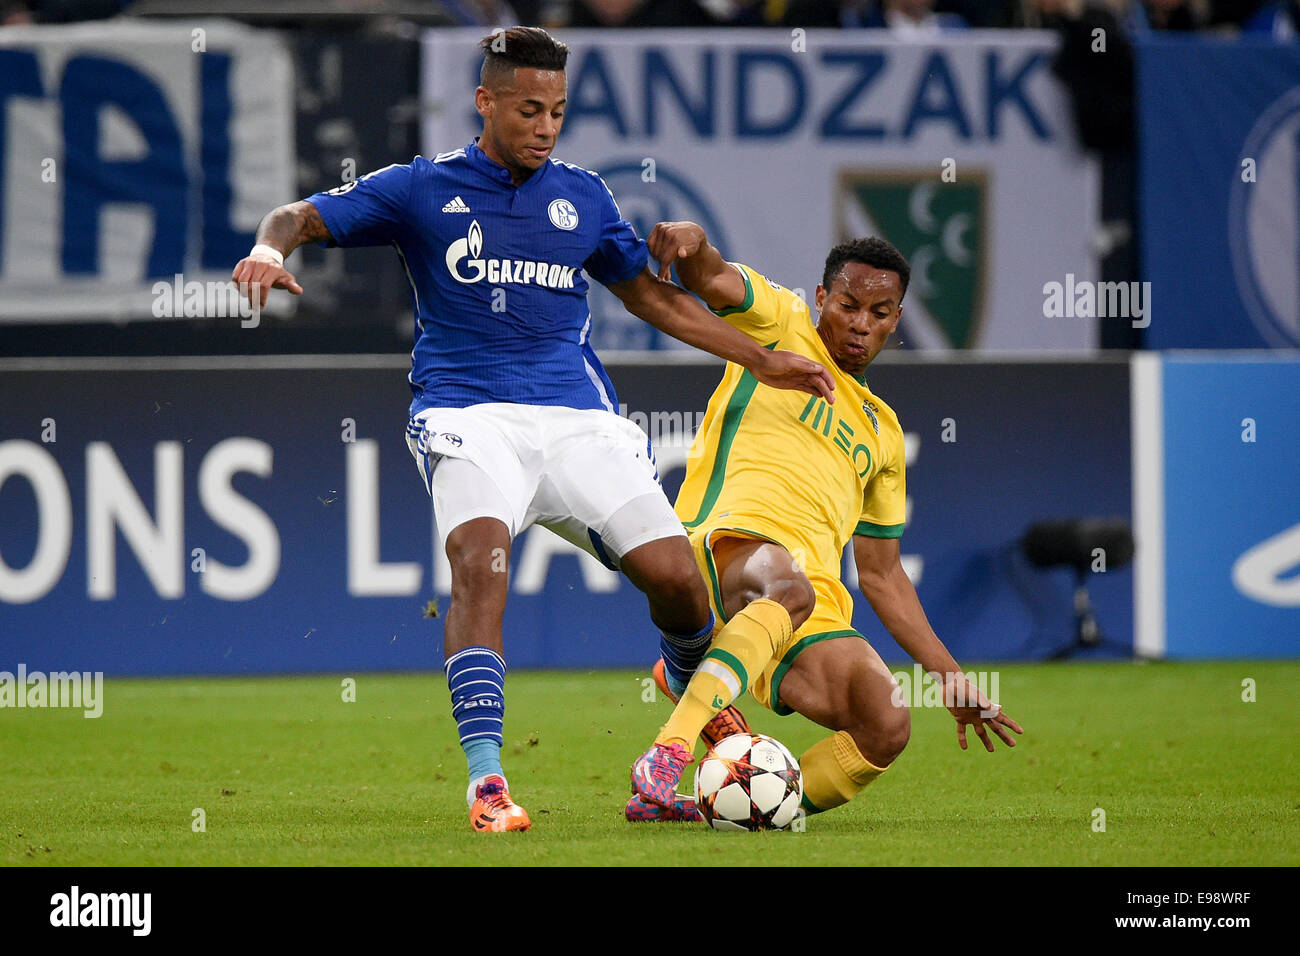 Gelsenkirchen, Germany. 21st Oct, 2014. Schalke's Dennis Aogo (l) and Andre Carrillo vie for the ball during the Champions League Group G match between FC Schalke 04 and Sporting Lissabon in Gelsenkirchen, Germany, 21 October 2014. Credit:  dpa picture alliance/Alamy Live News Stock Photo